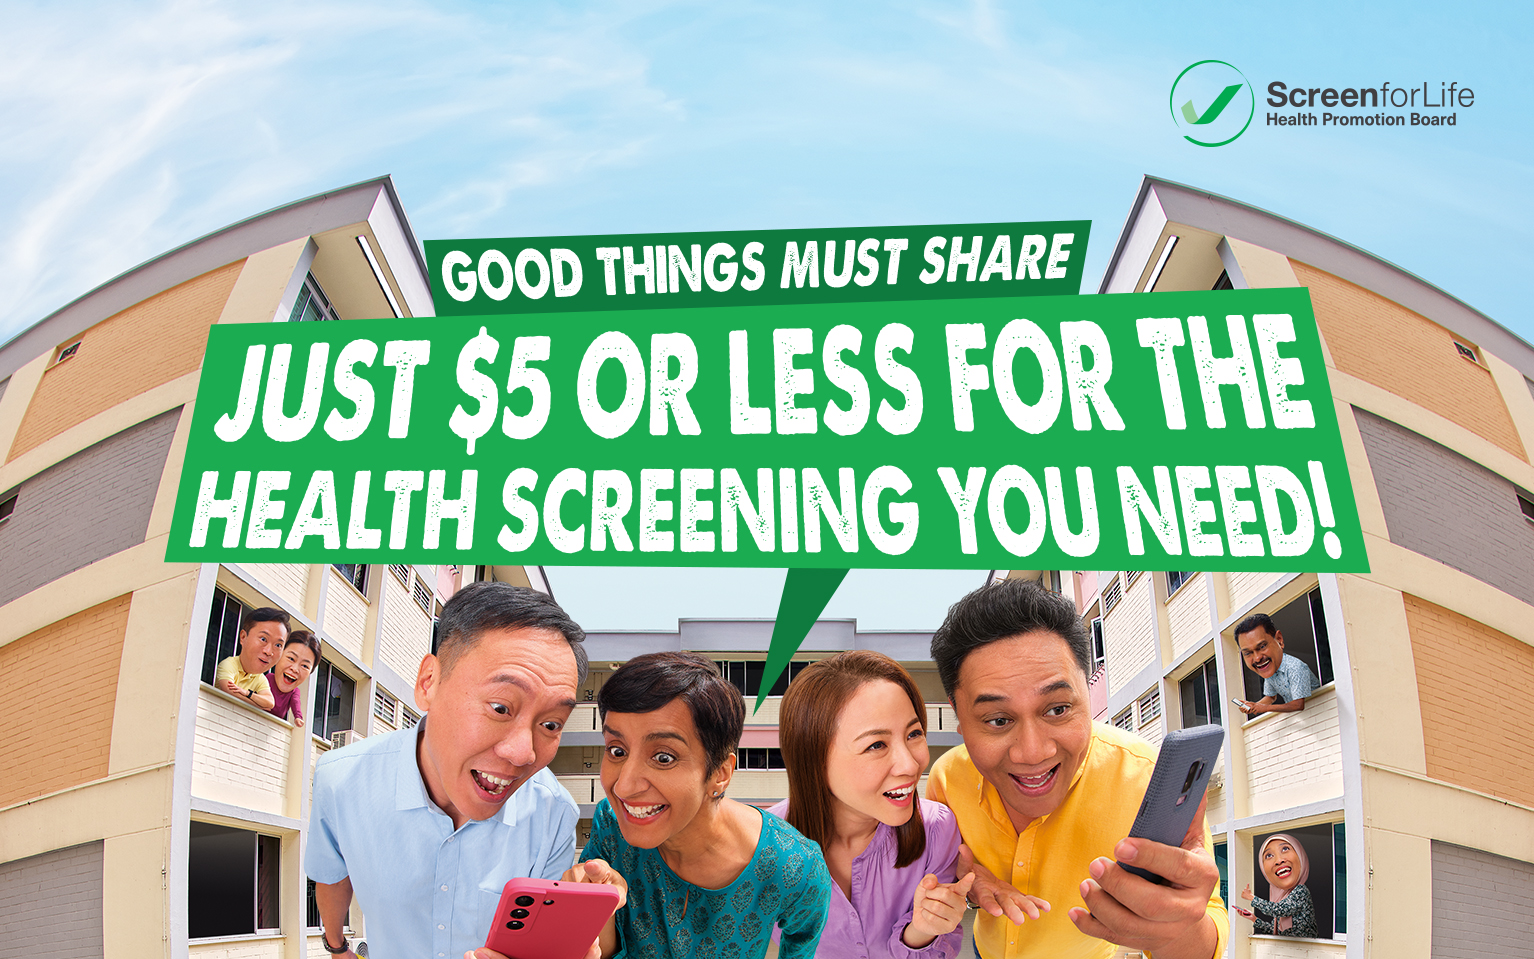 ARE YOU ELIGIBLE FOR SUBSIDISED SCREENING?